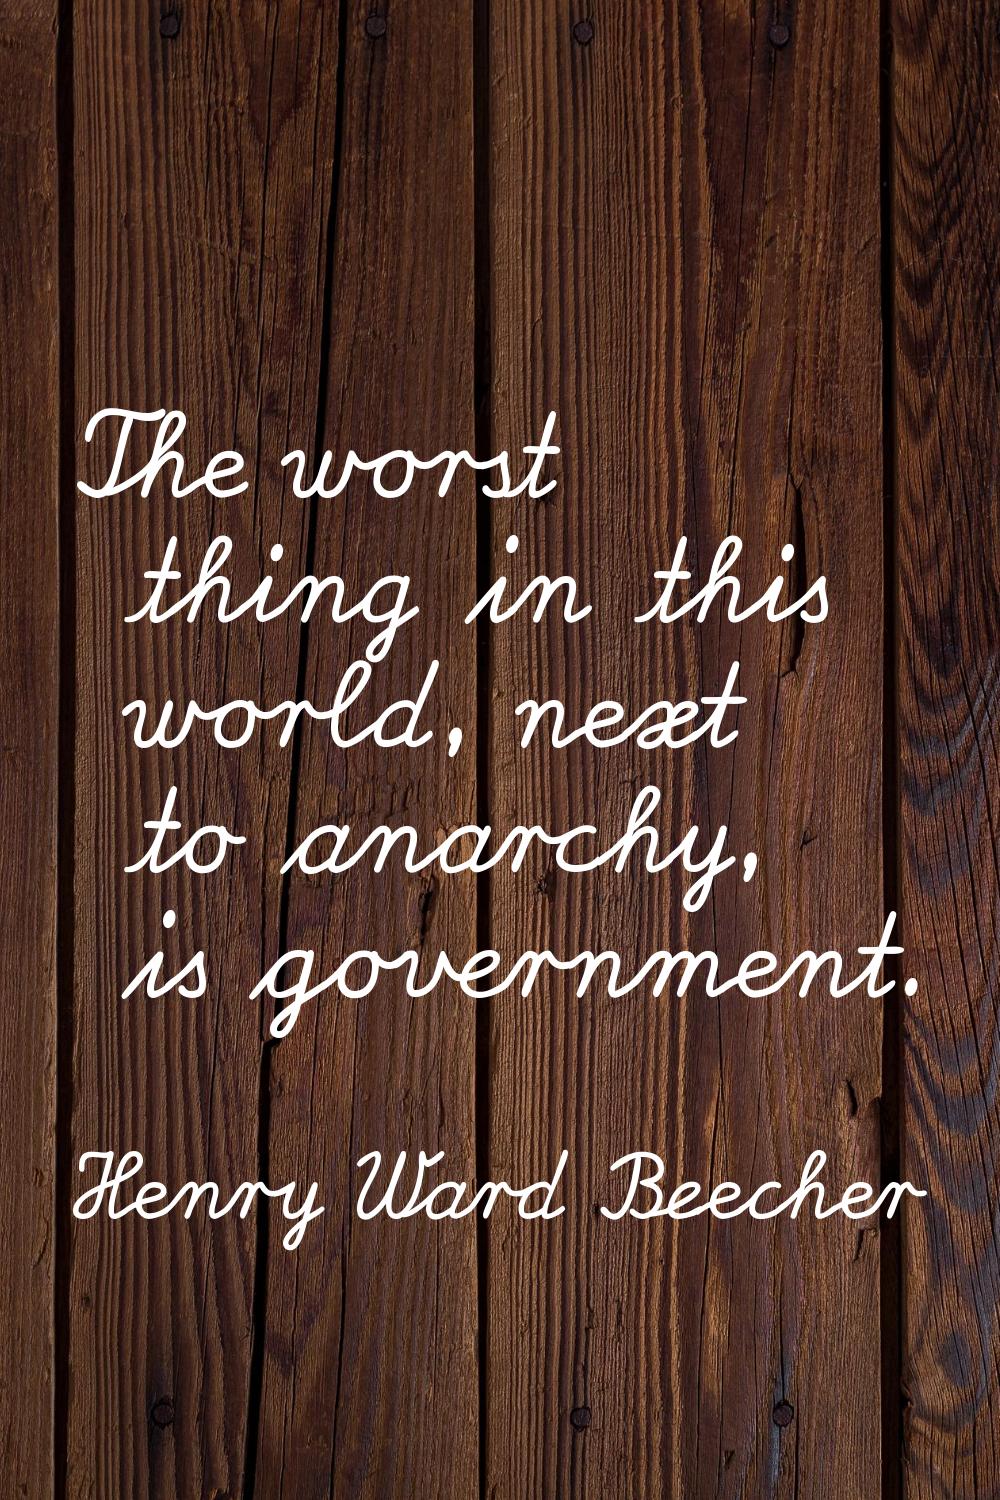 The worst thing in this world, next to anarchy, is government.